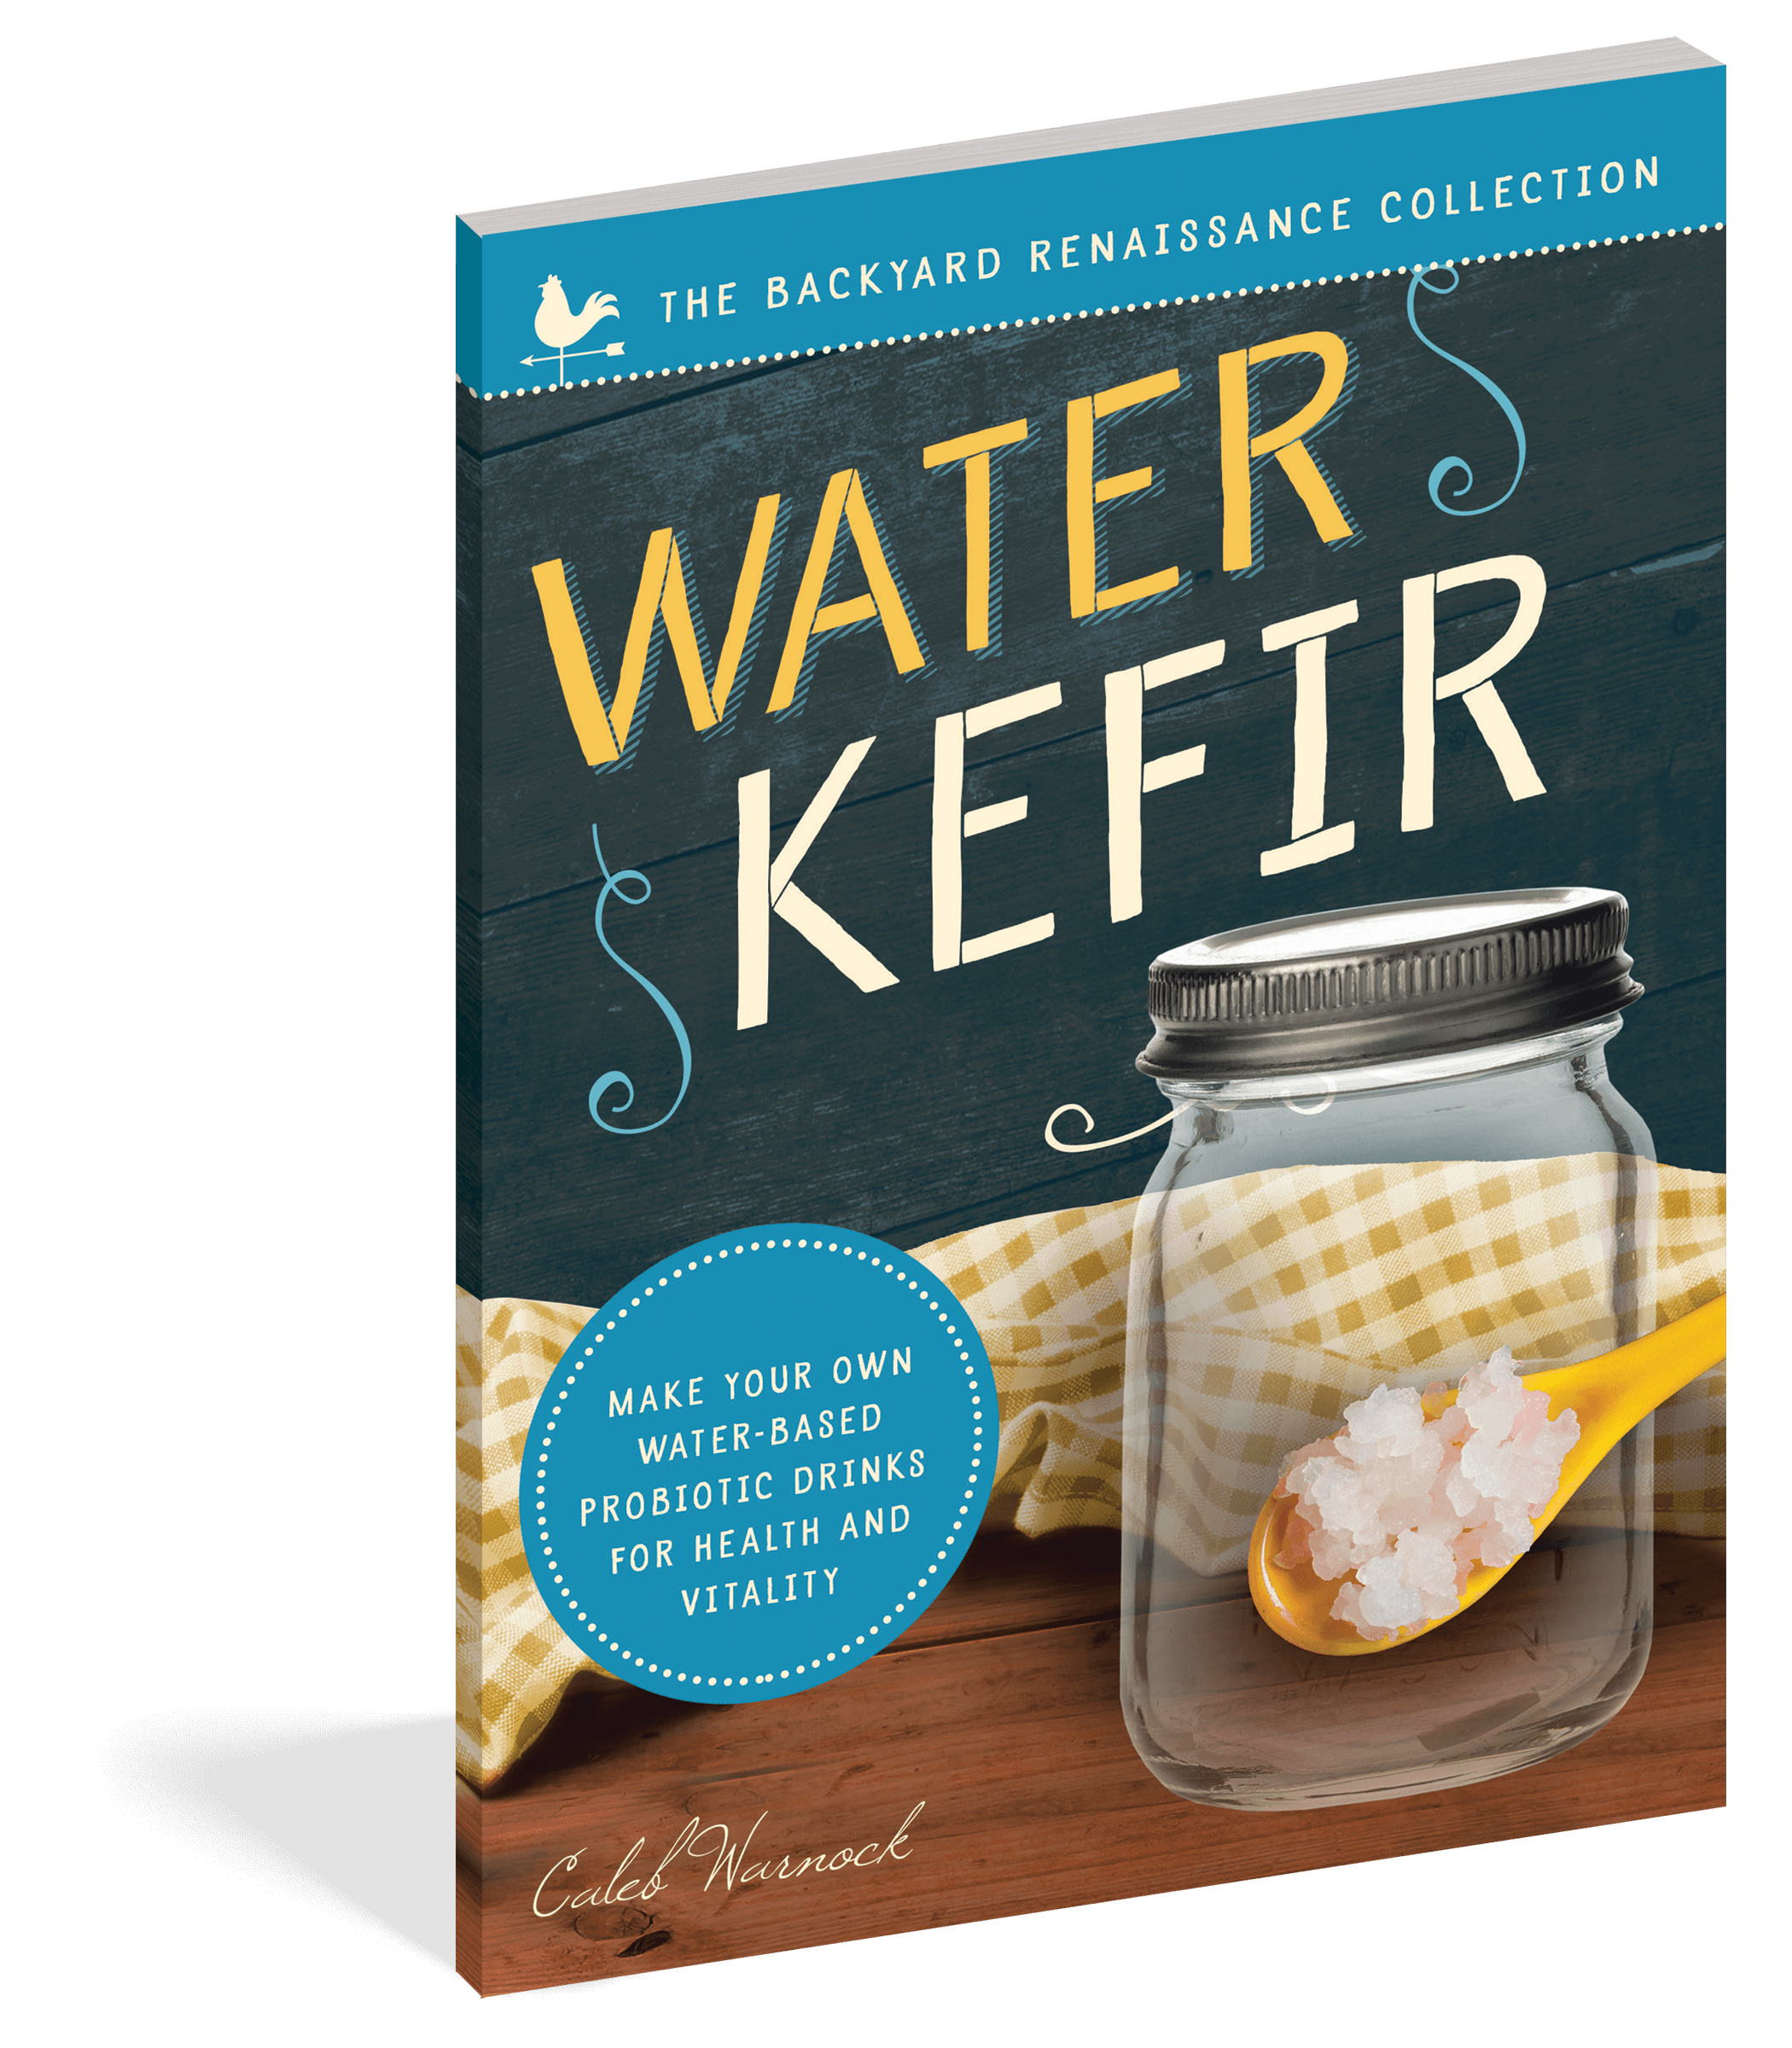 The cover of the book Water Kefir.